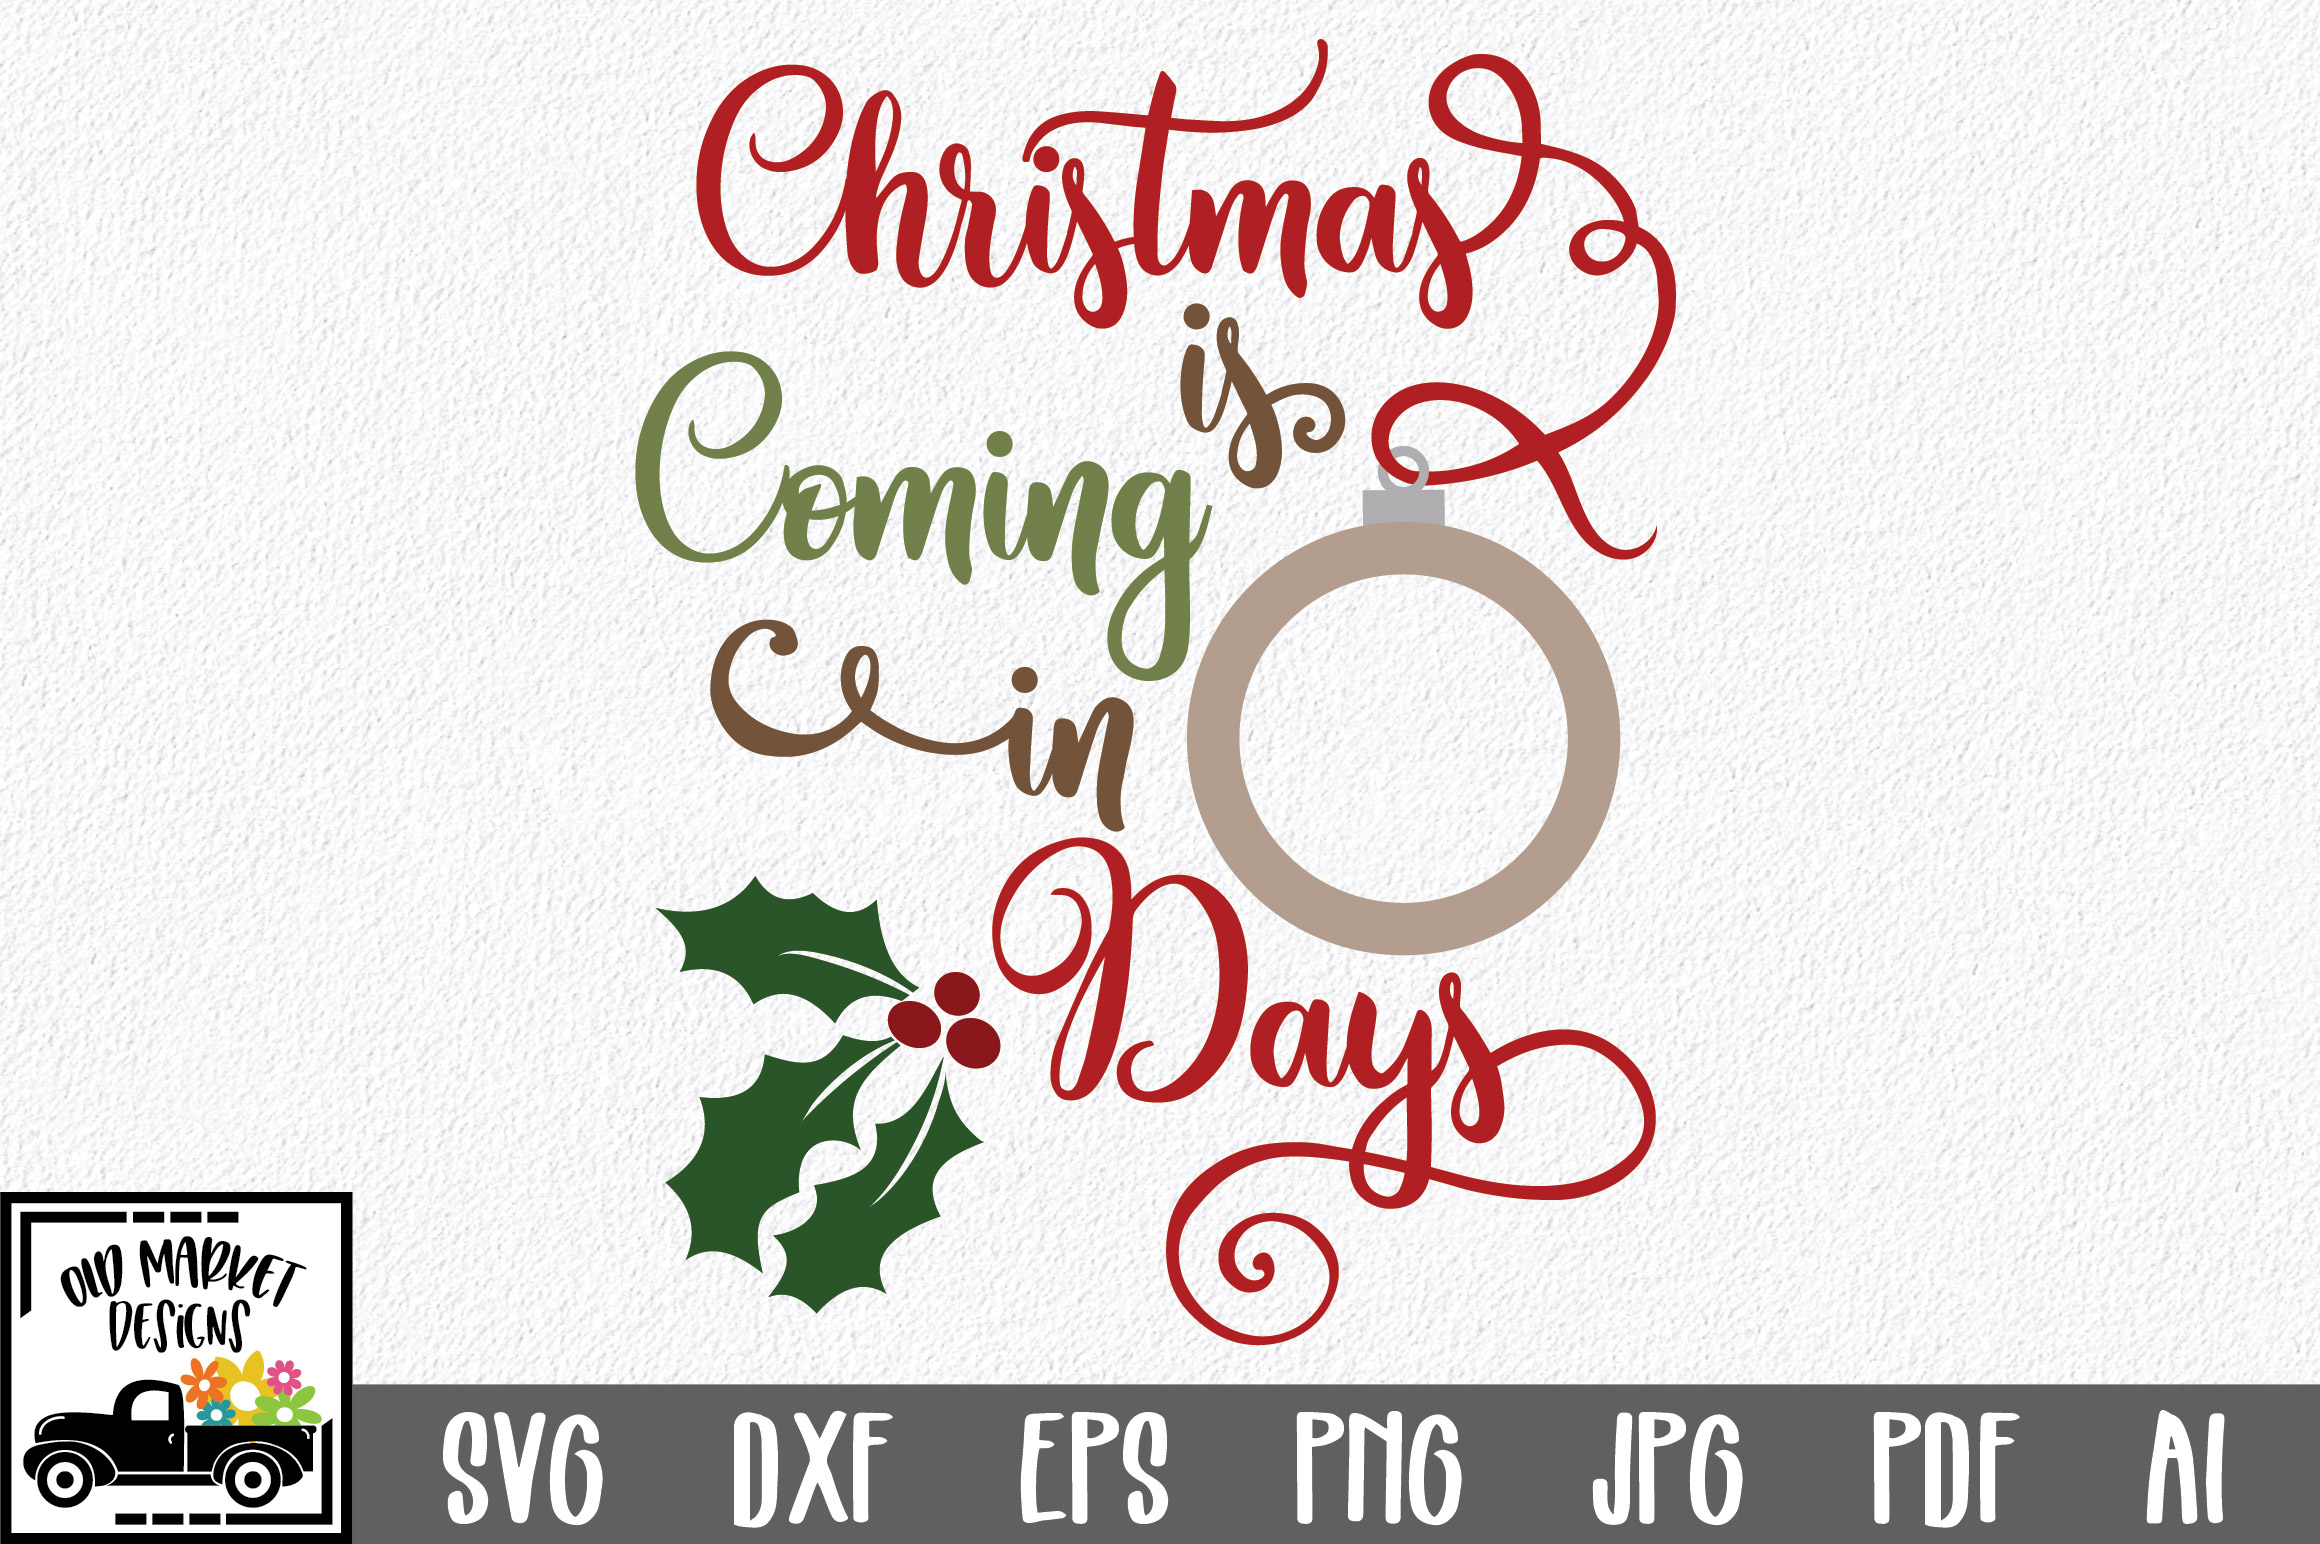 Download Christmas Countdown SVG Cut File - Christmas Ornament SVG